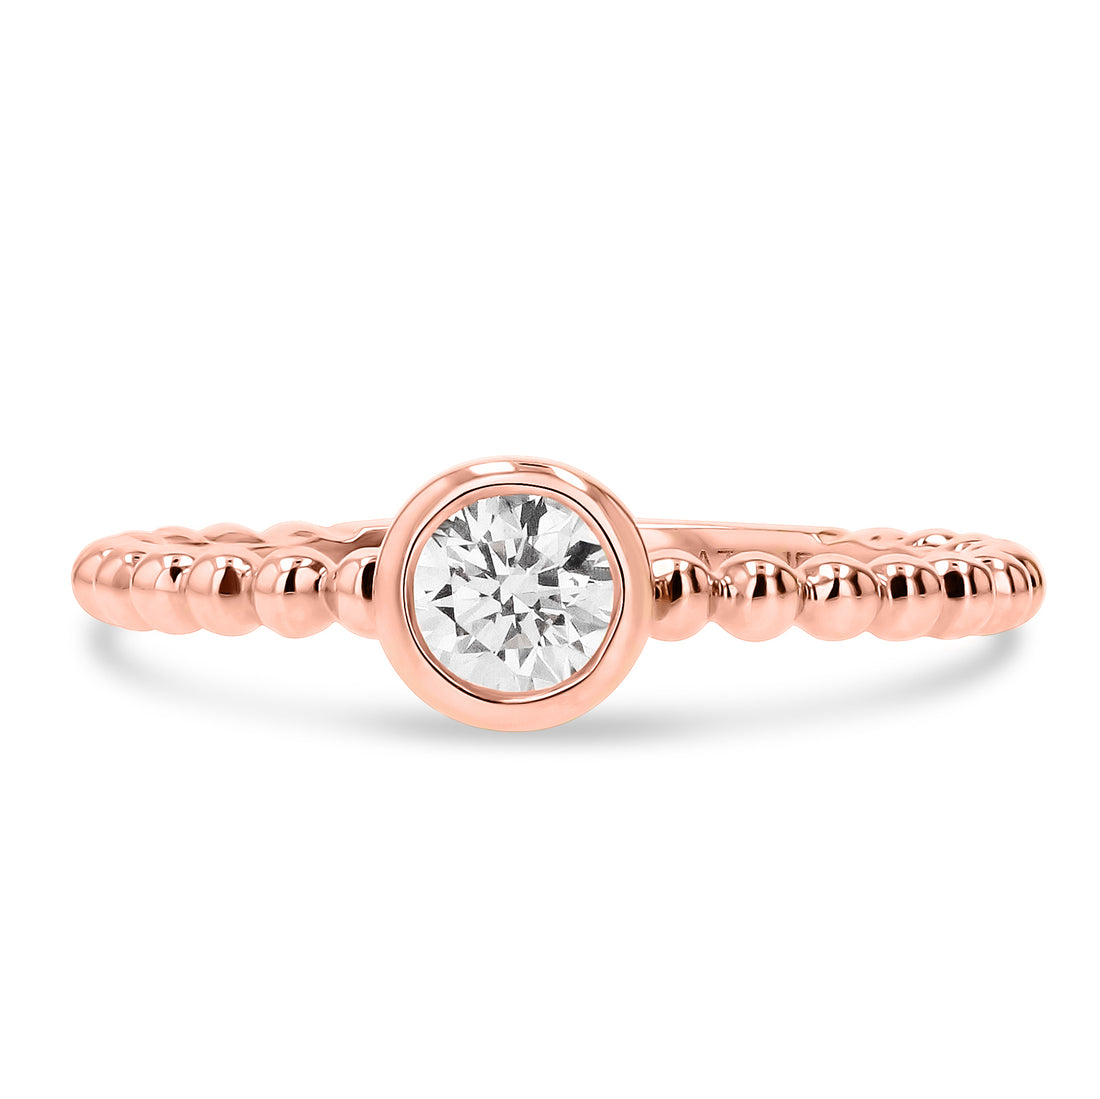 De Beers Forevermark Tribute Collection Ring - Skeie's Jewelers